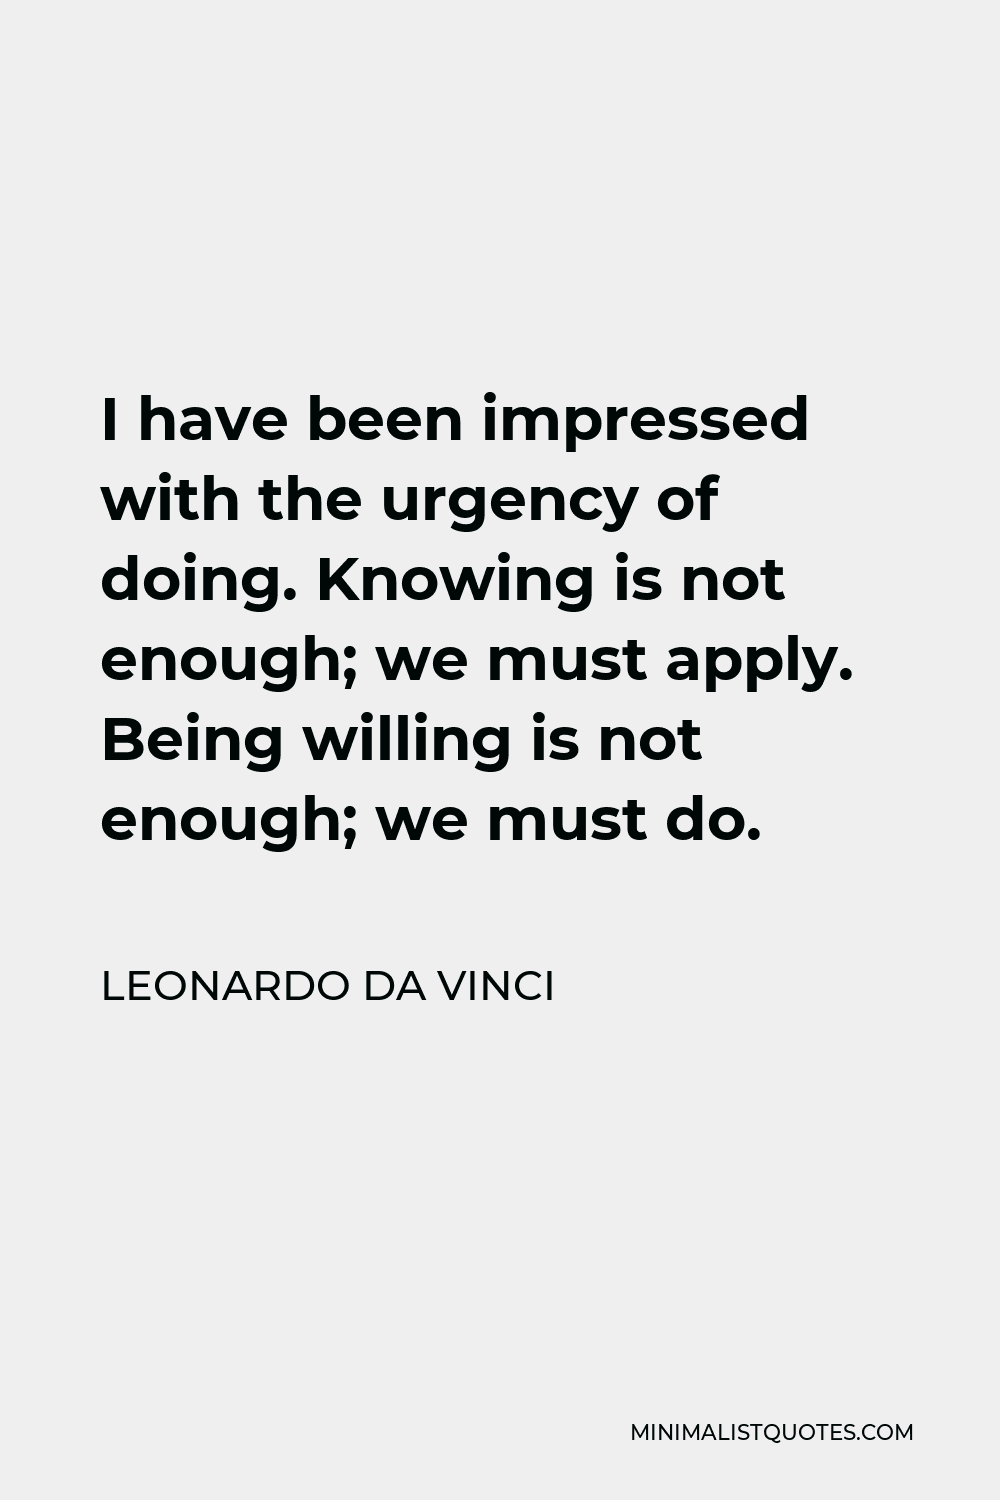 Leonardo da Vinci Quote - I have been impressed with the urgency of doing. Knowing is not enough; we must apply. Being willing is not enough; we must do.